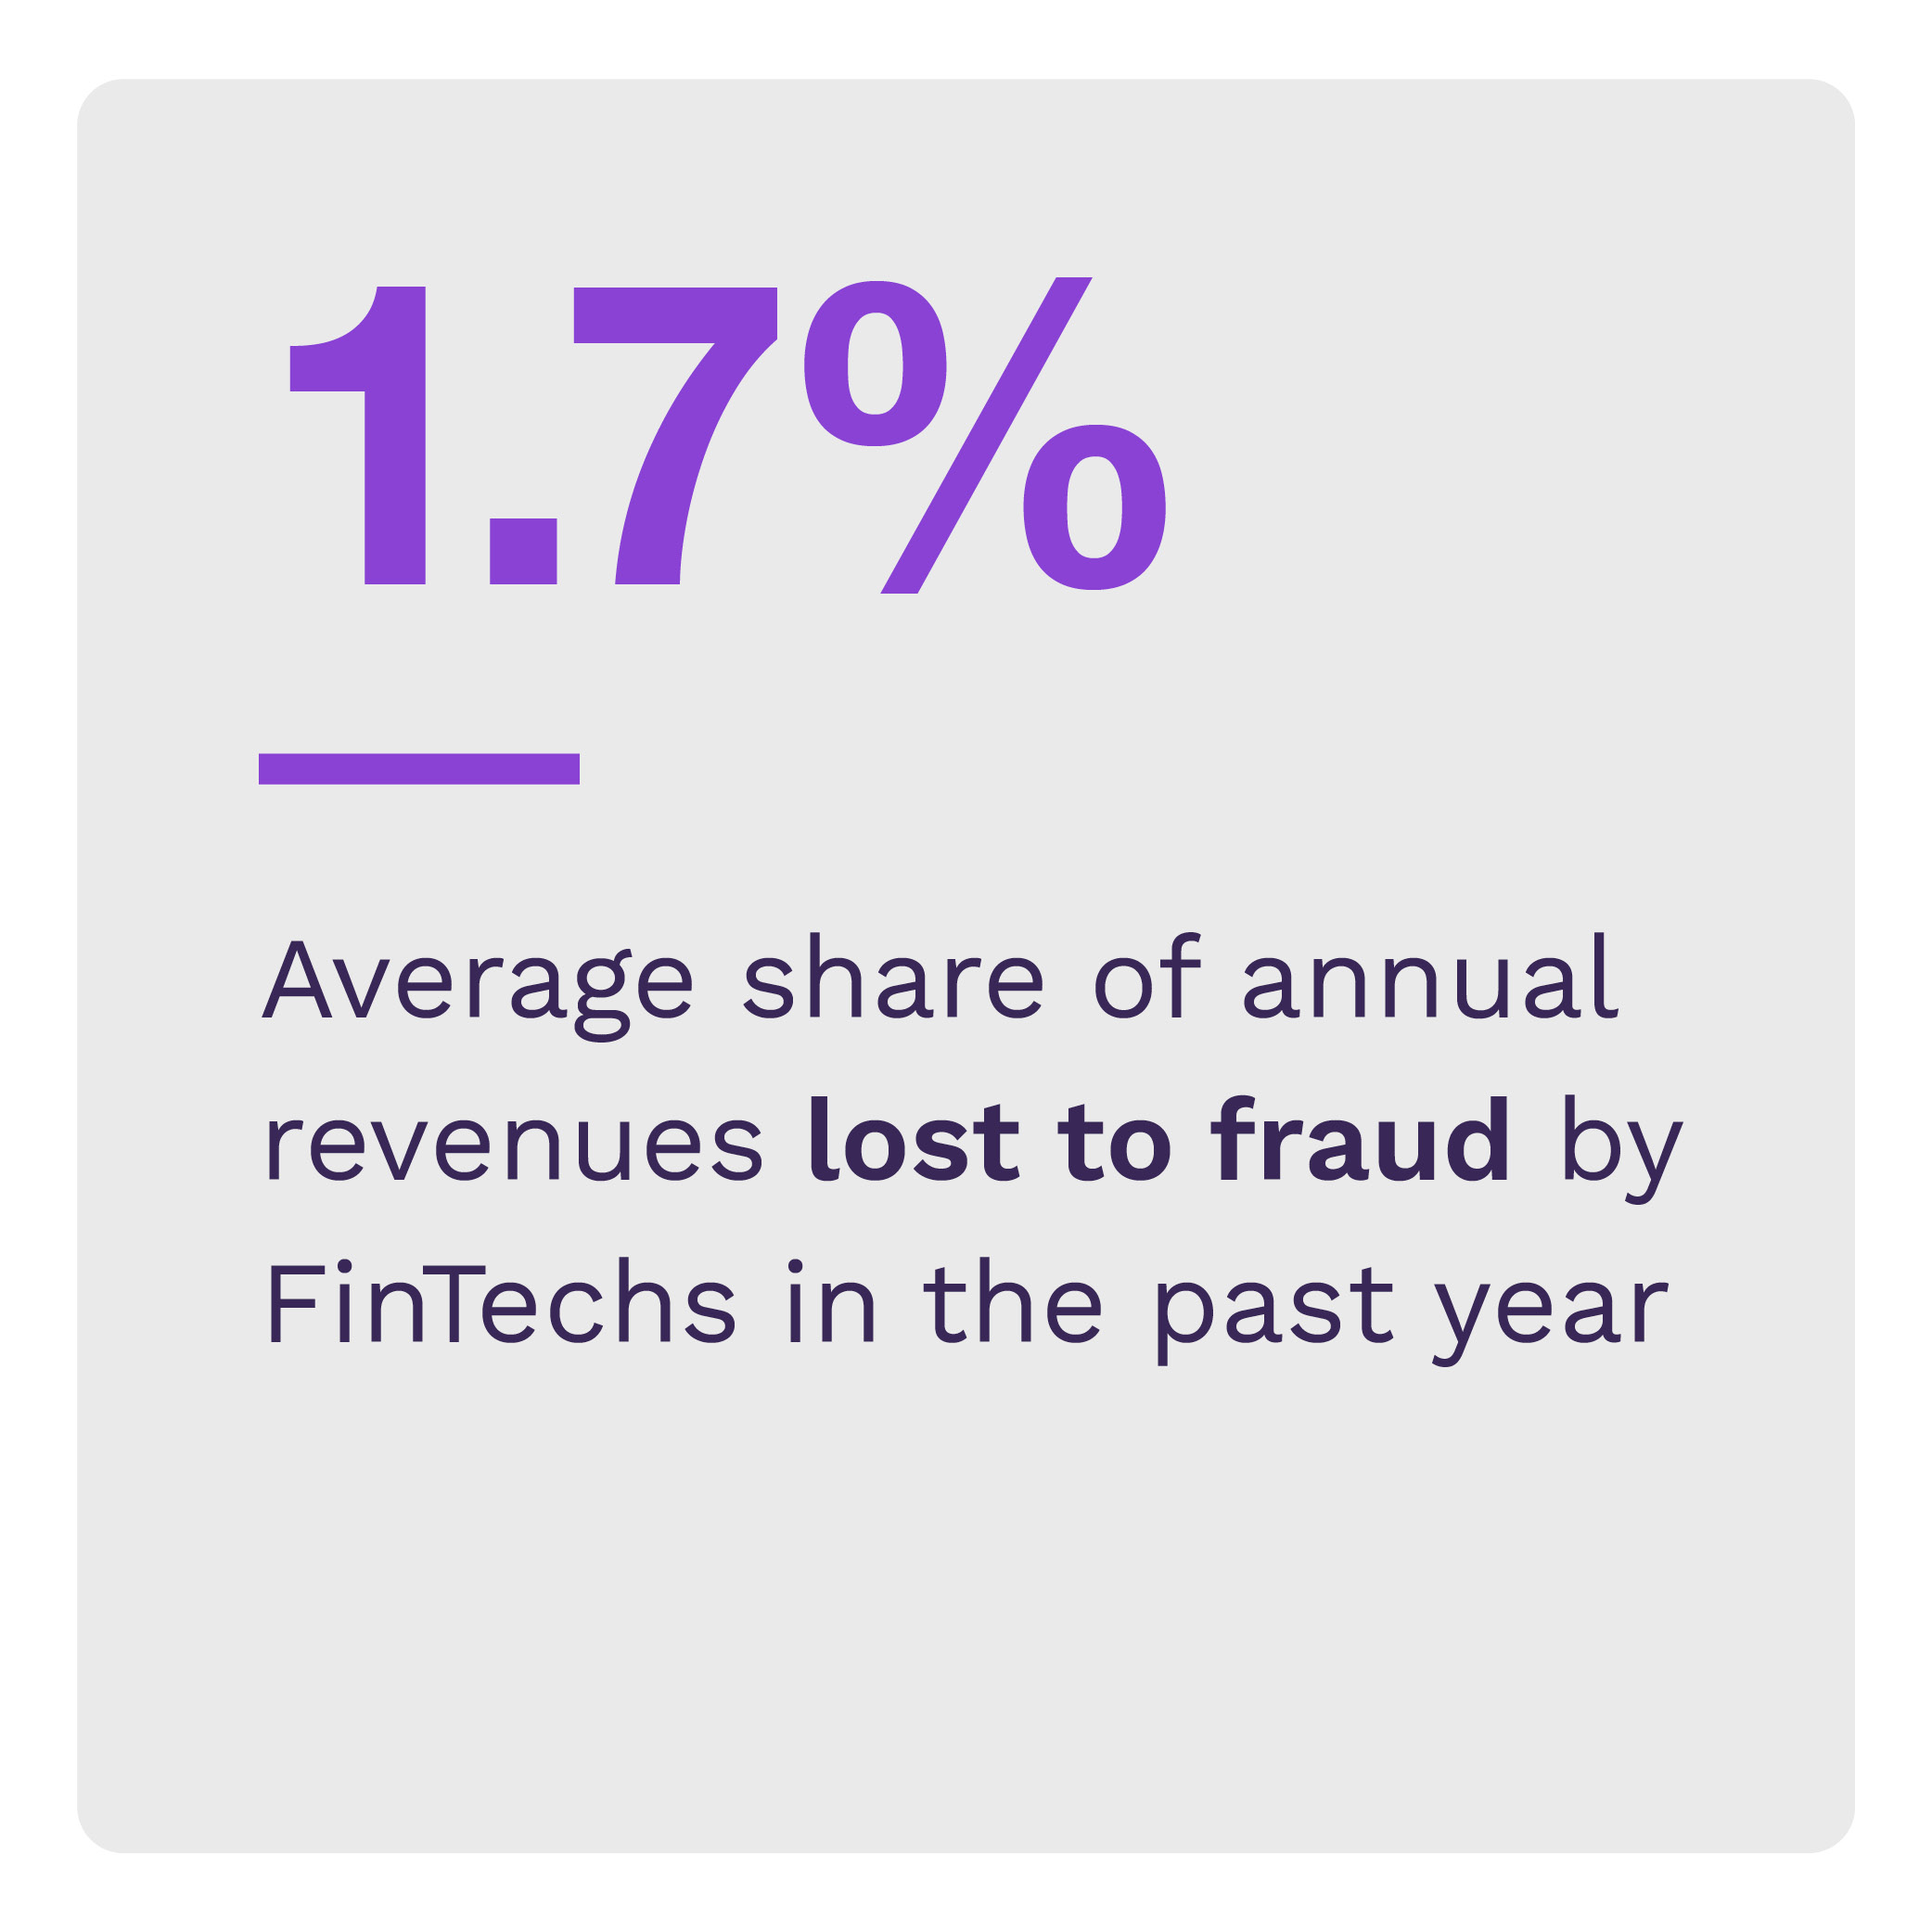 1.7%: Average share of annual revenues lost to fraud by FinTechs in the past year